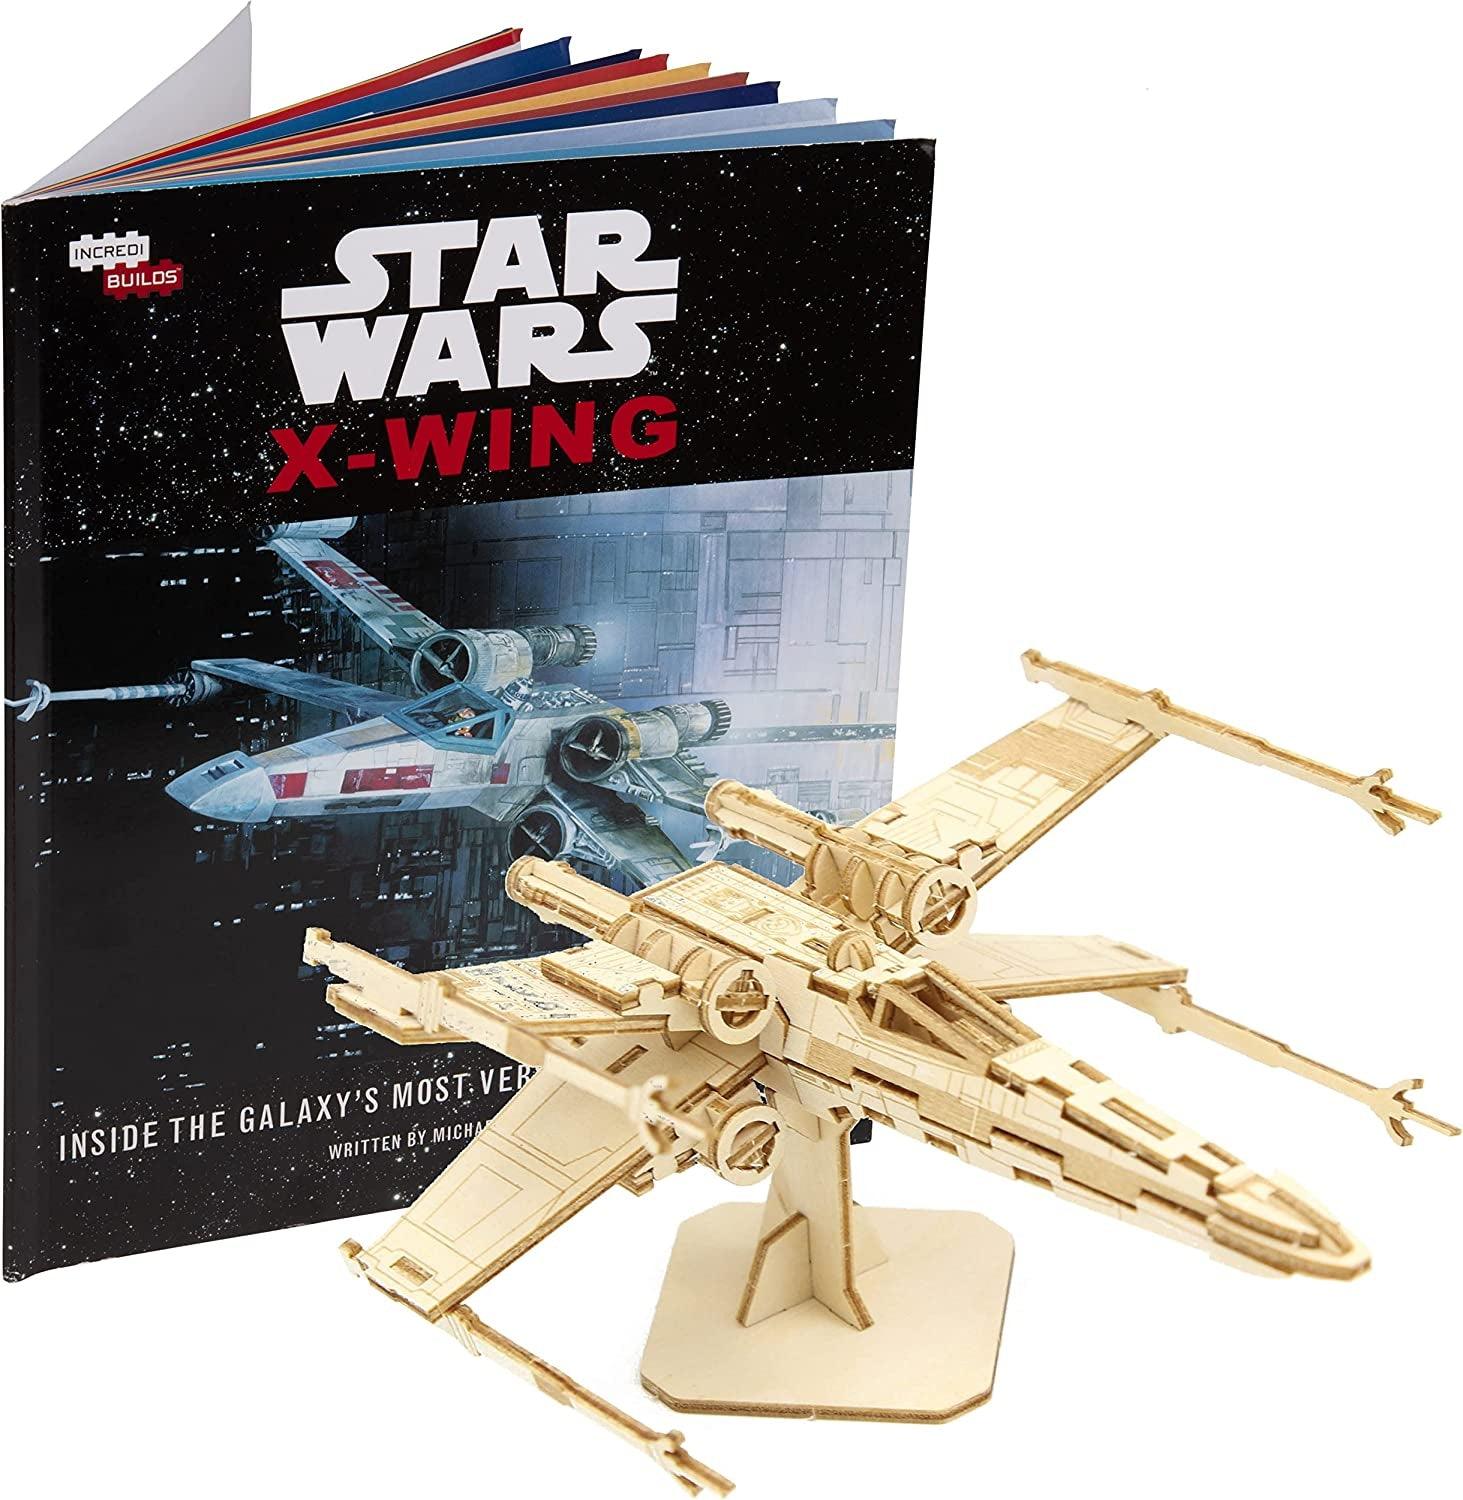 Incredibuilds Star Wars X-Wing 3D Wood Puzzle & Model Figure Kit (73 Pcs) - Build & Paint Your Own 3-D Movie Toy - WoodArtSupply